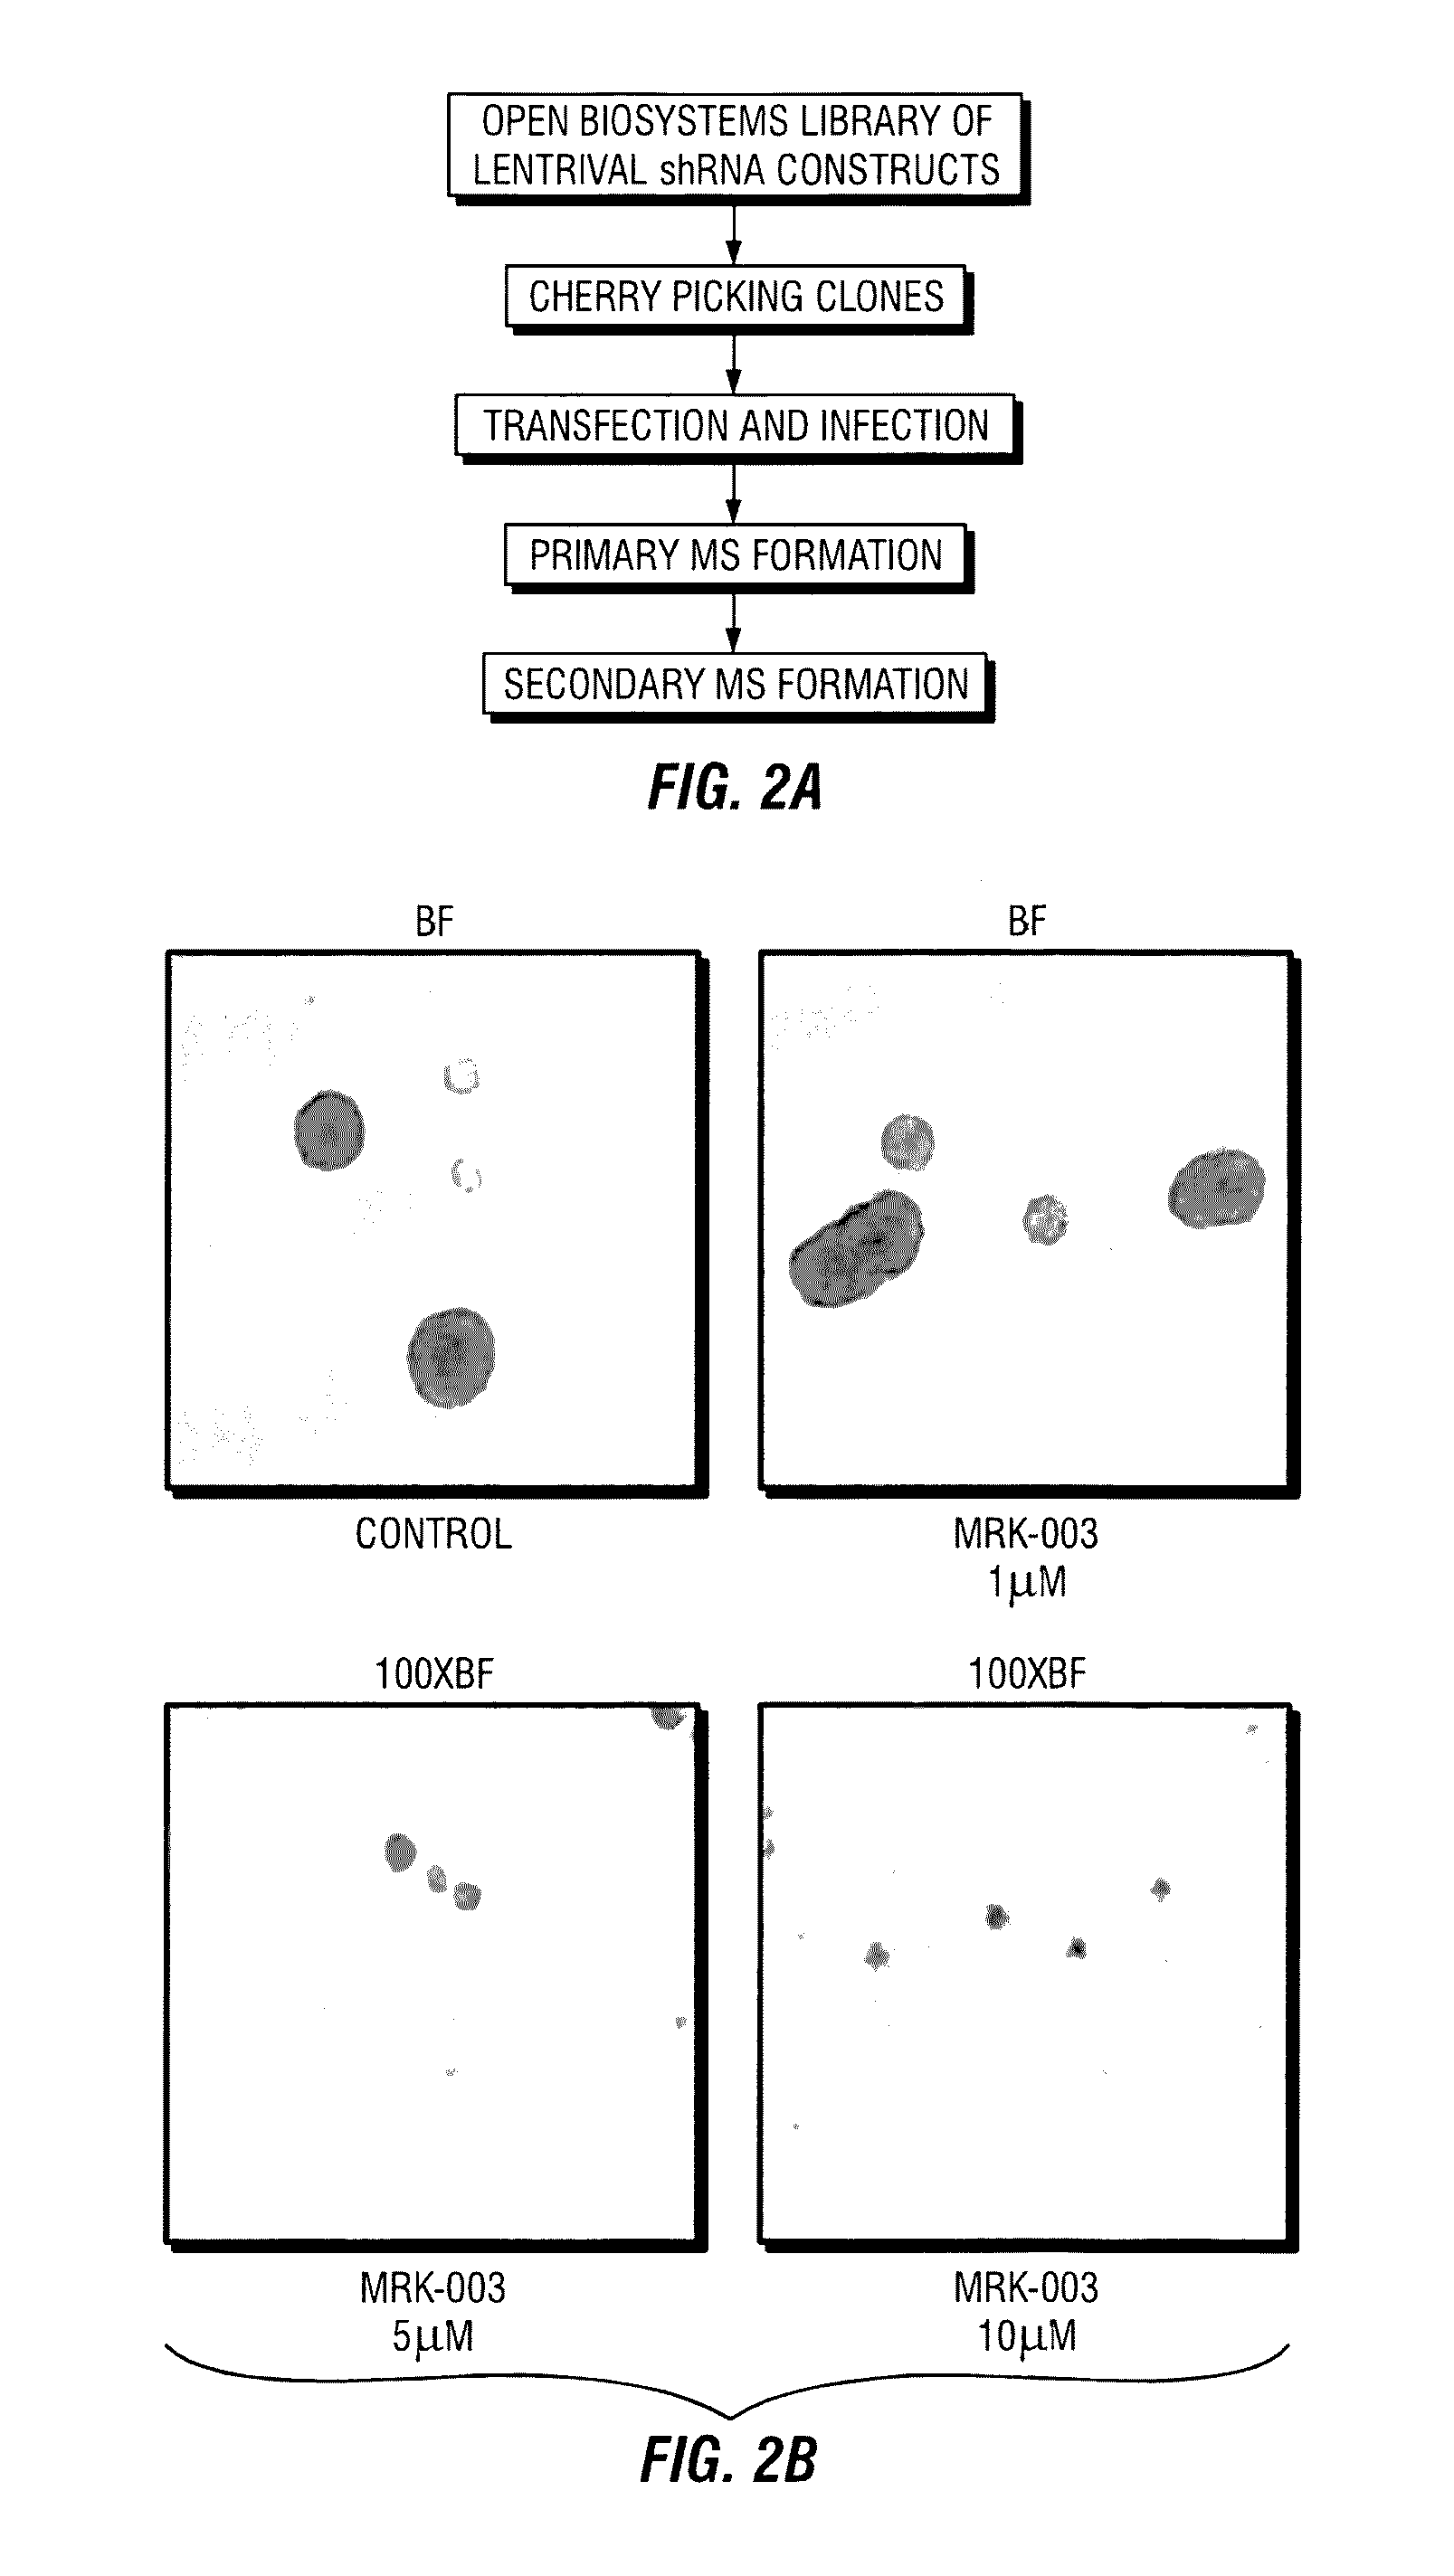 siRNA compositions and methods for inhibiting gene expression in tumor initiating cells of breast cancer